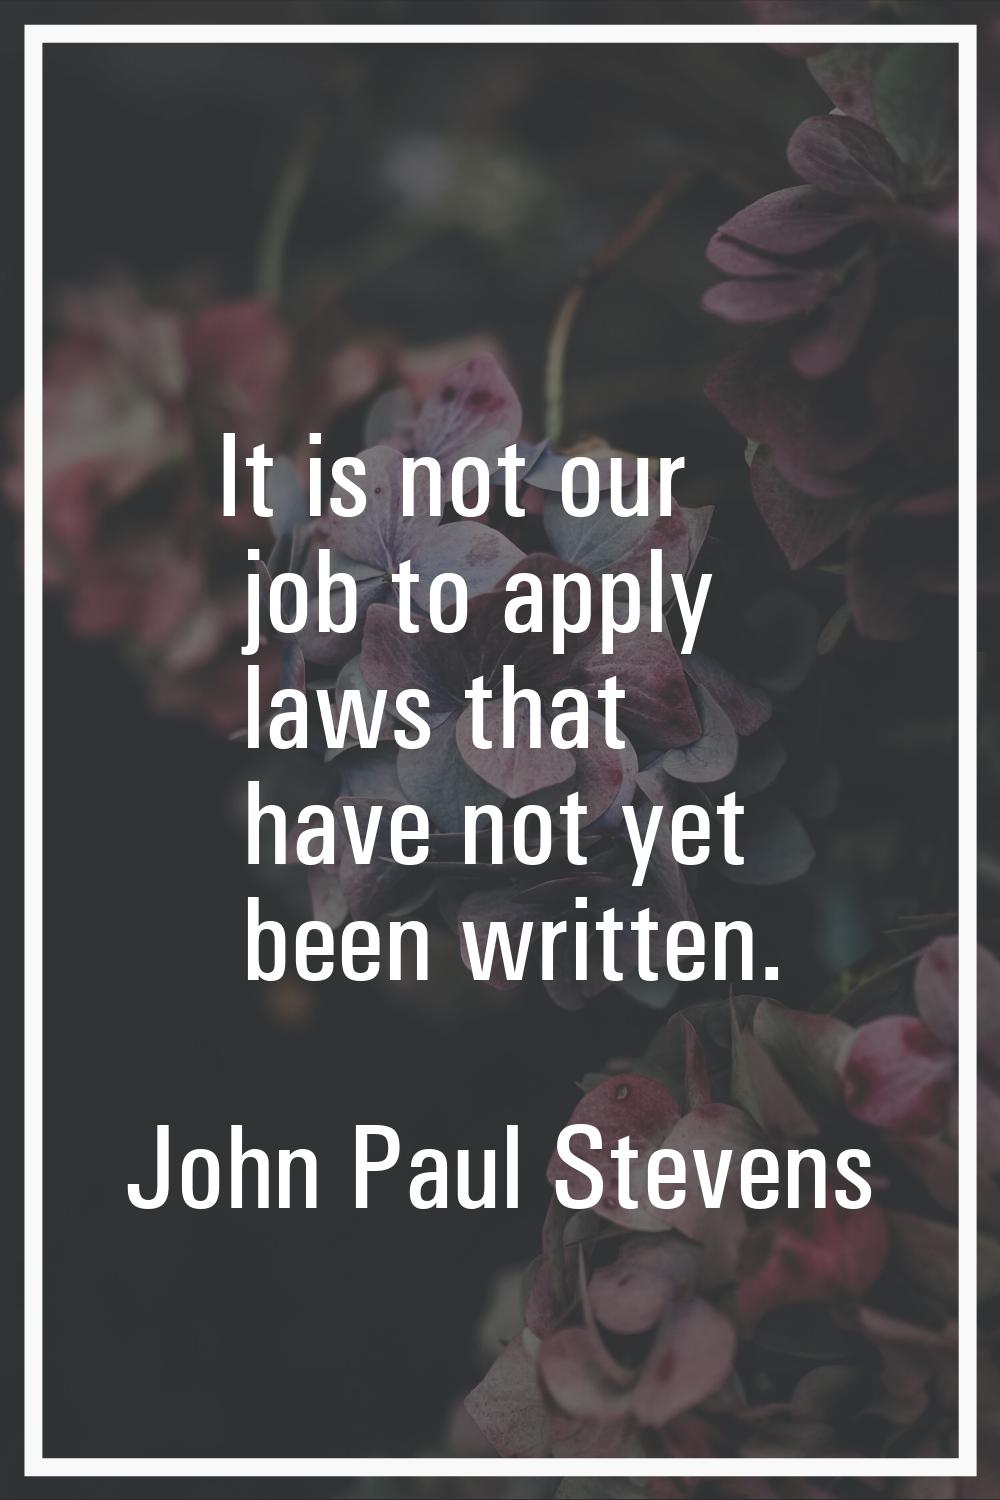 It is not our job to apply laws that have not yet been written.